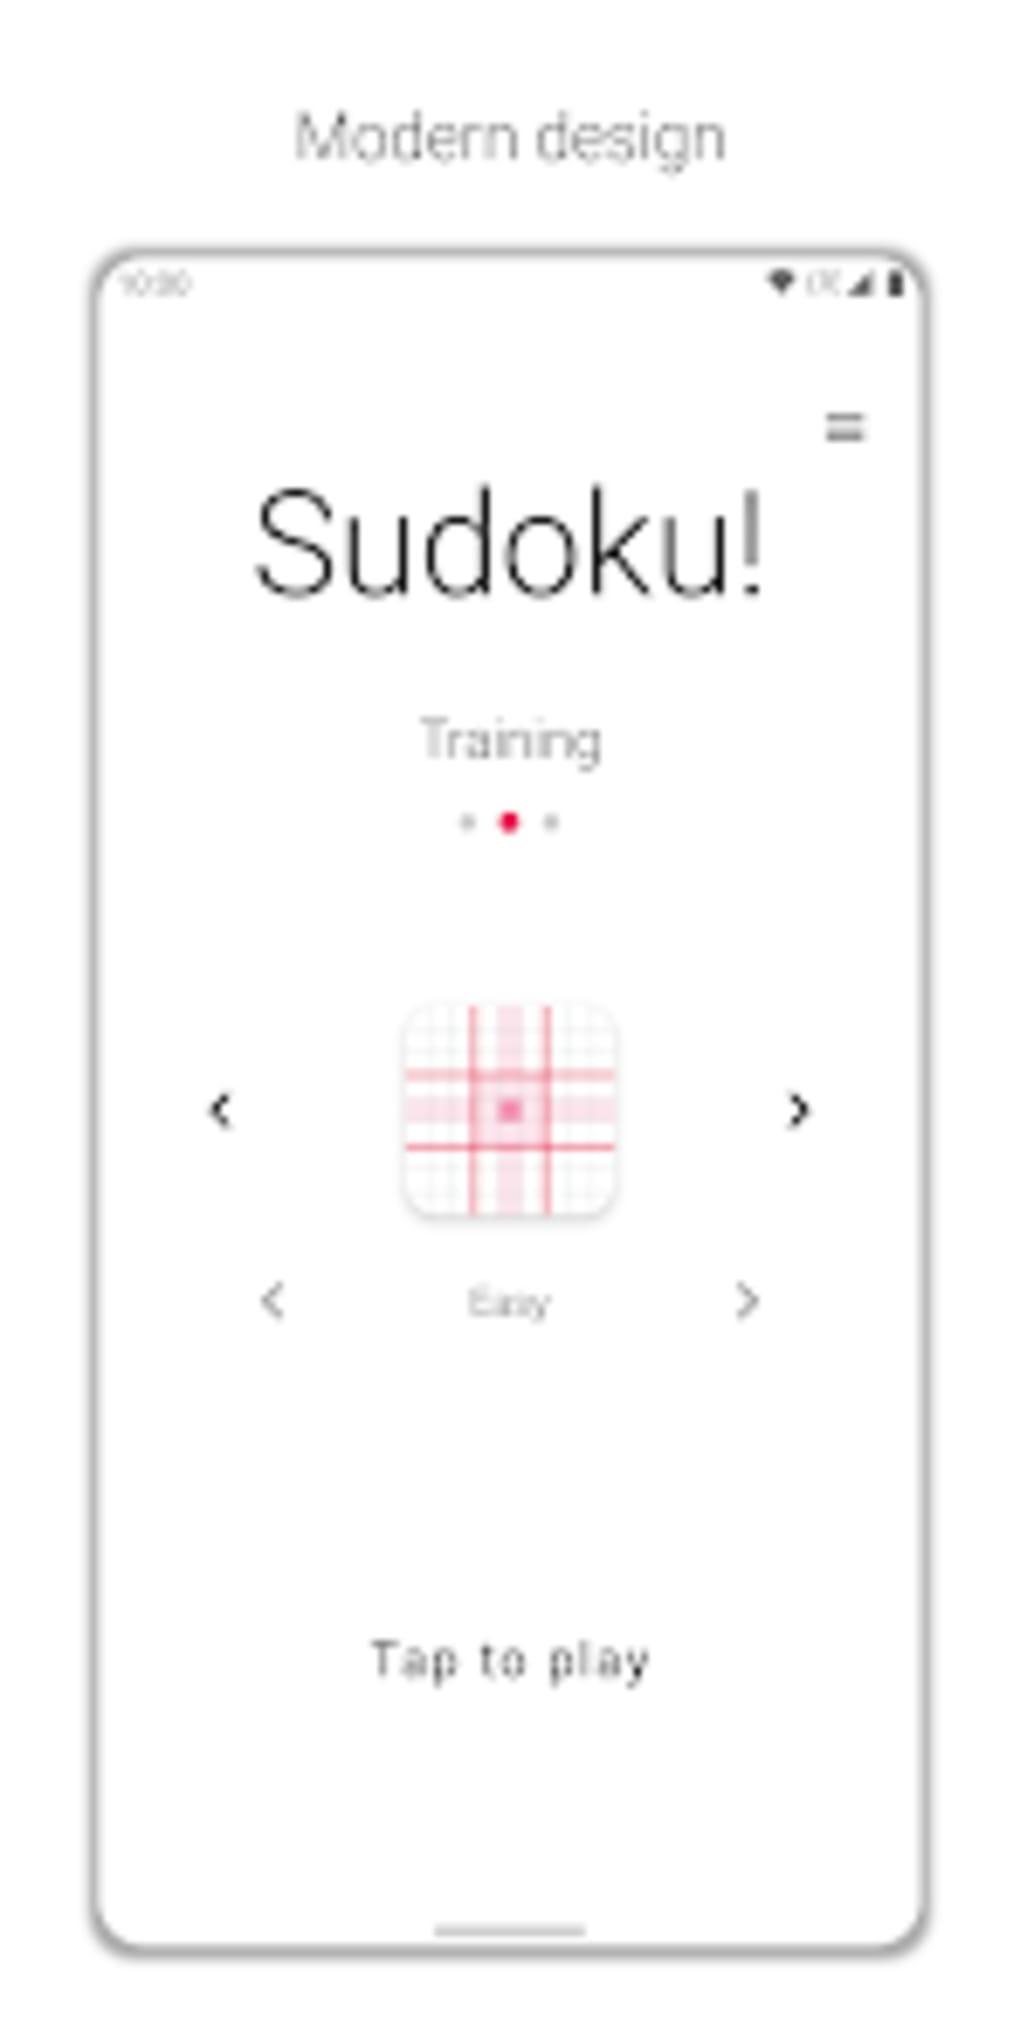 sudoku-tap-to-play-para-android-download